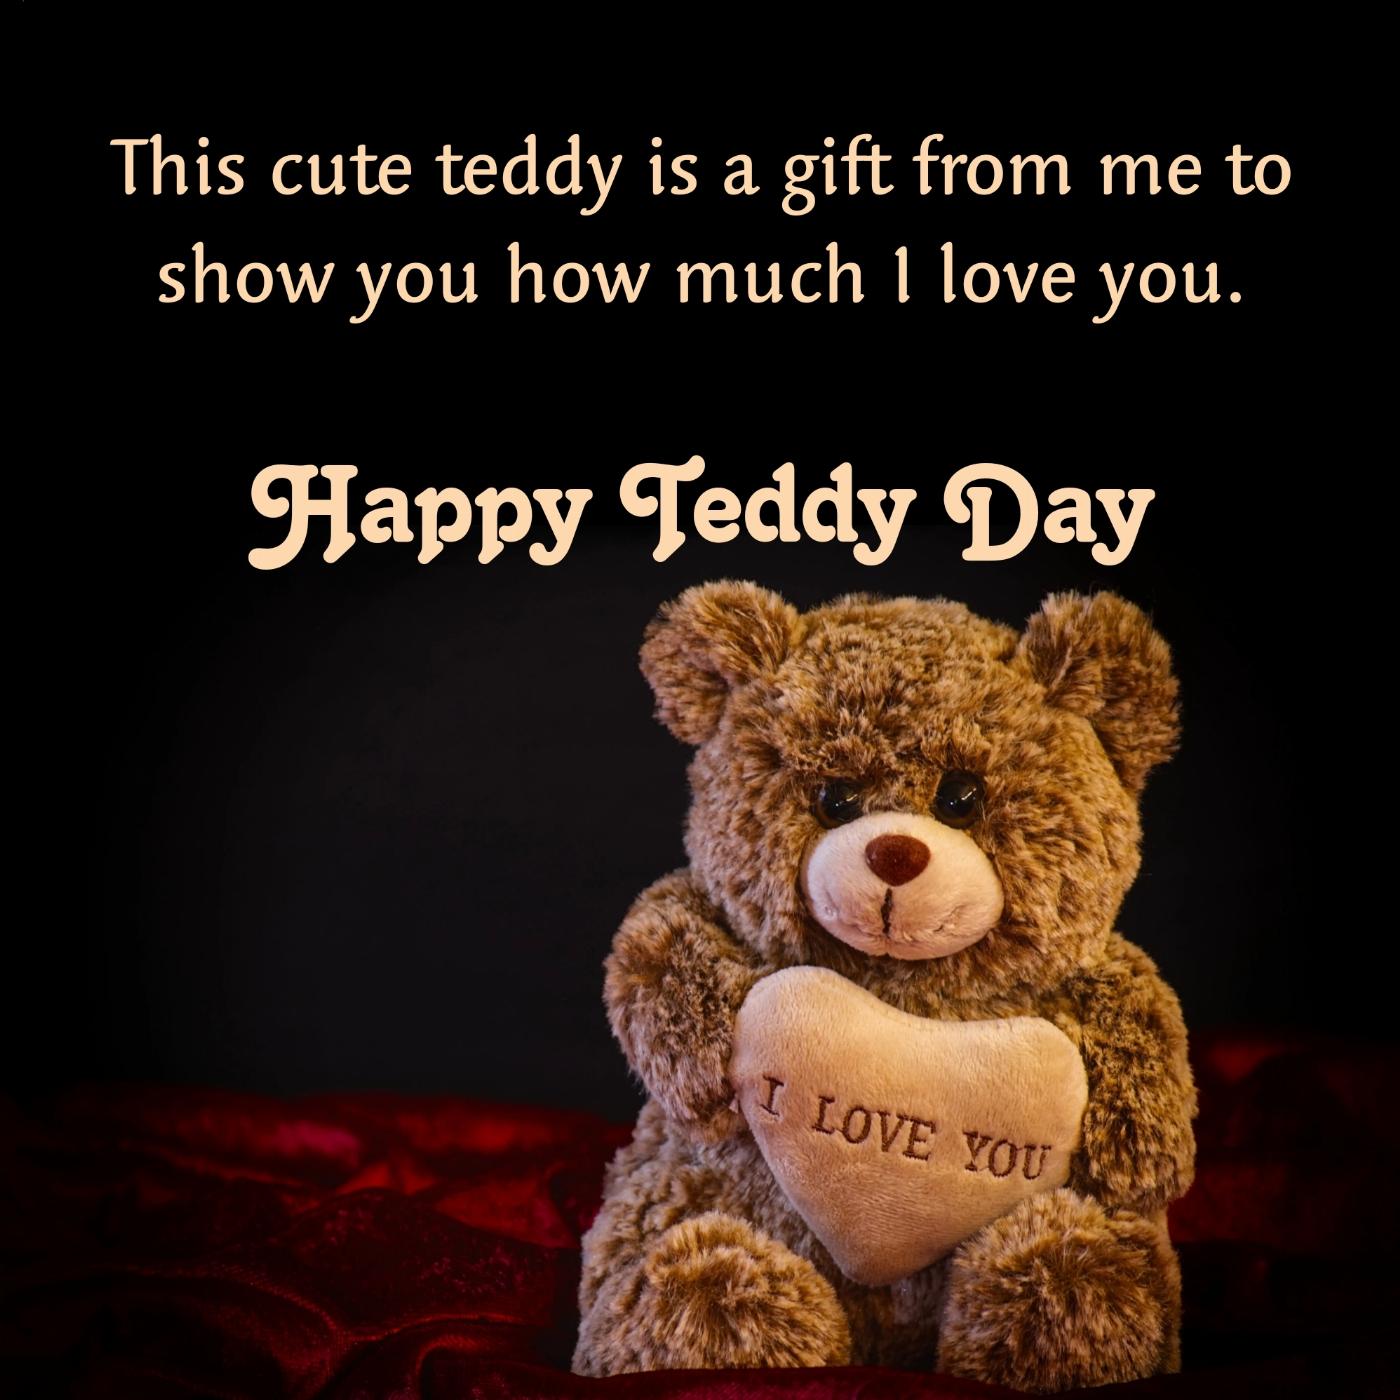 This cute teddy is a gift from me to show you